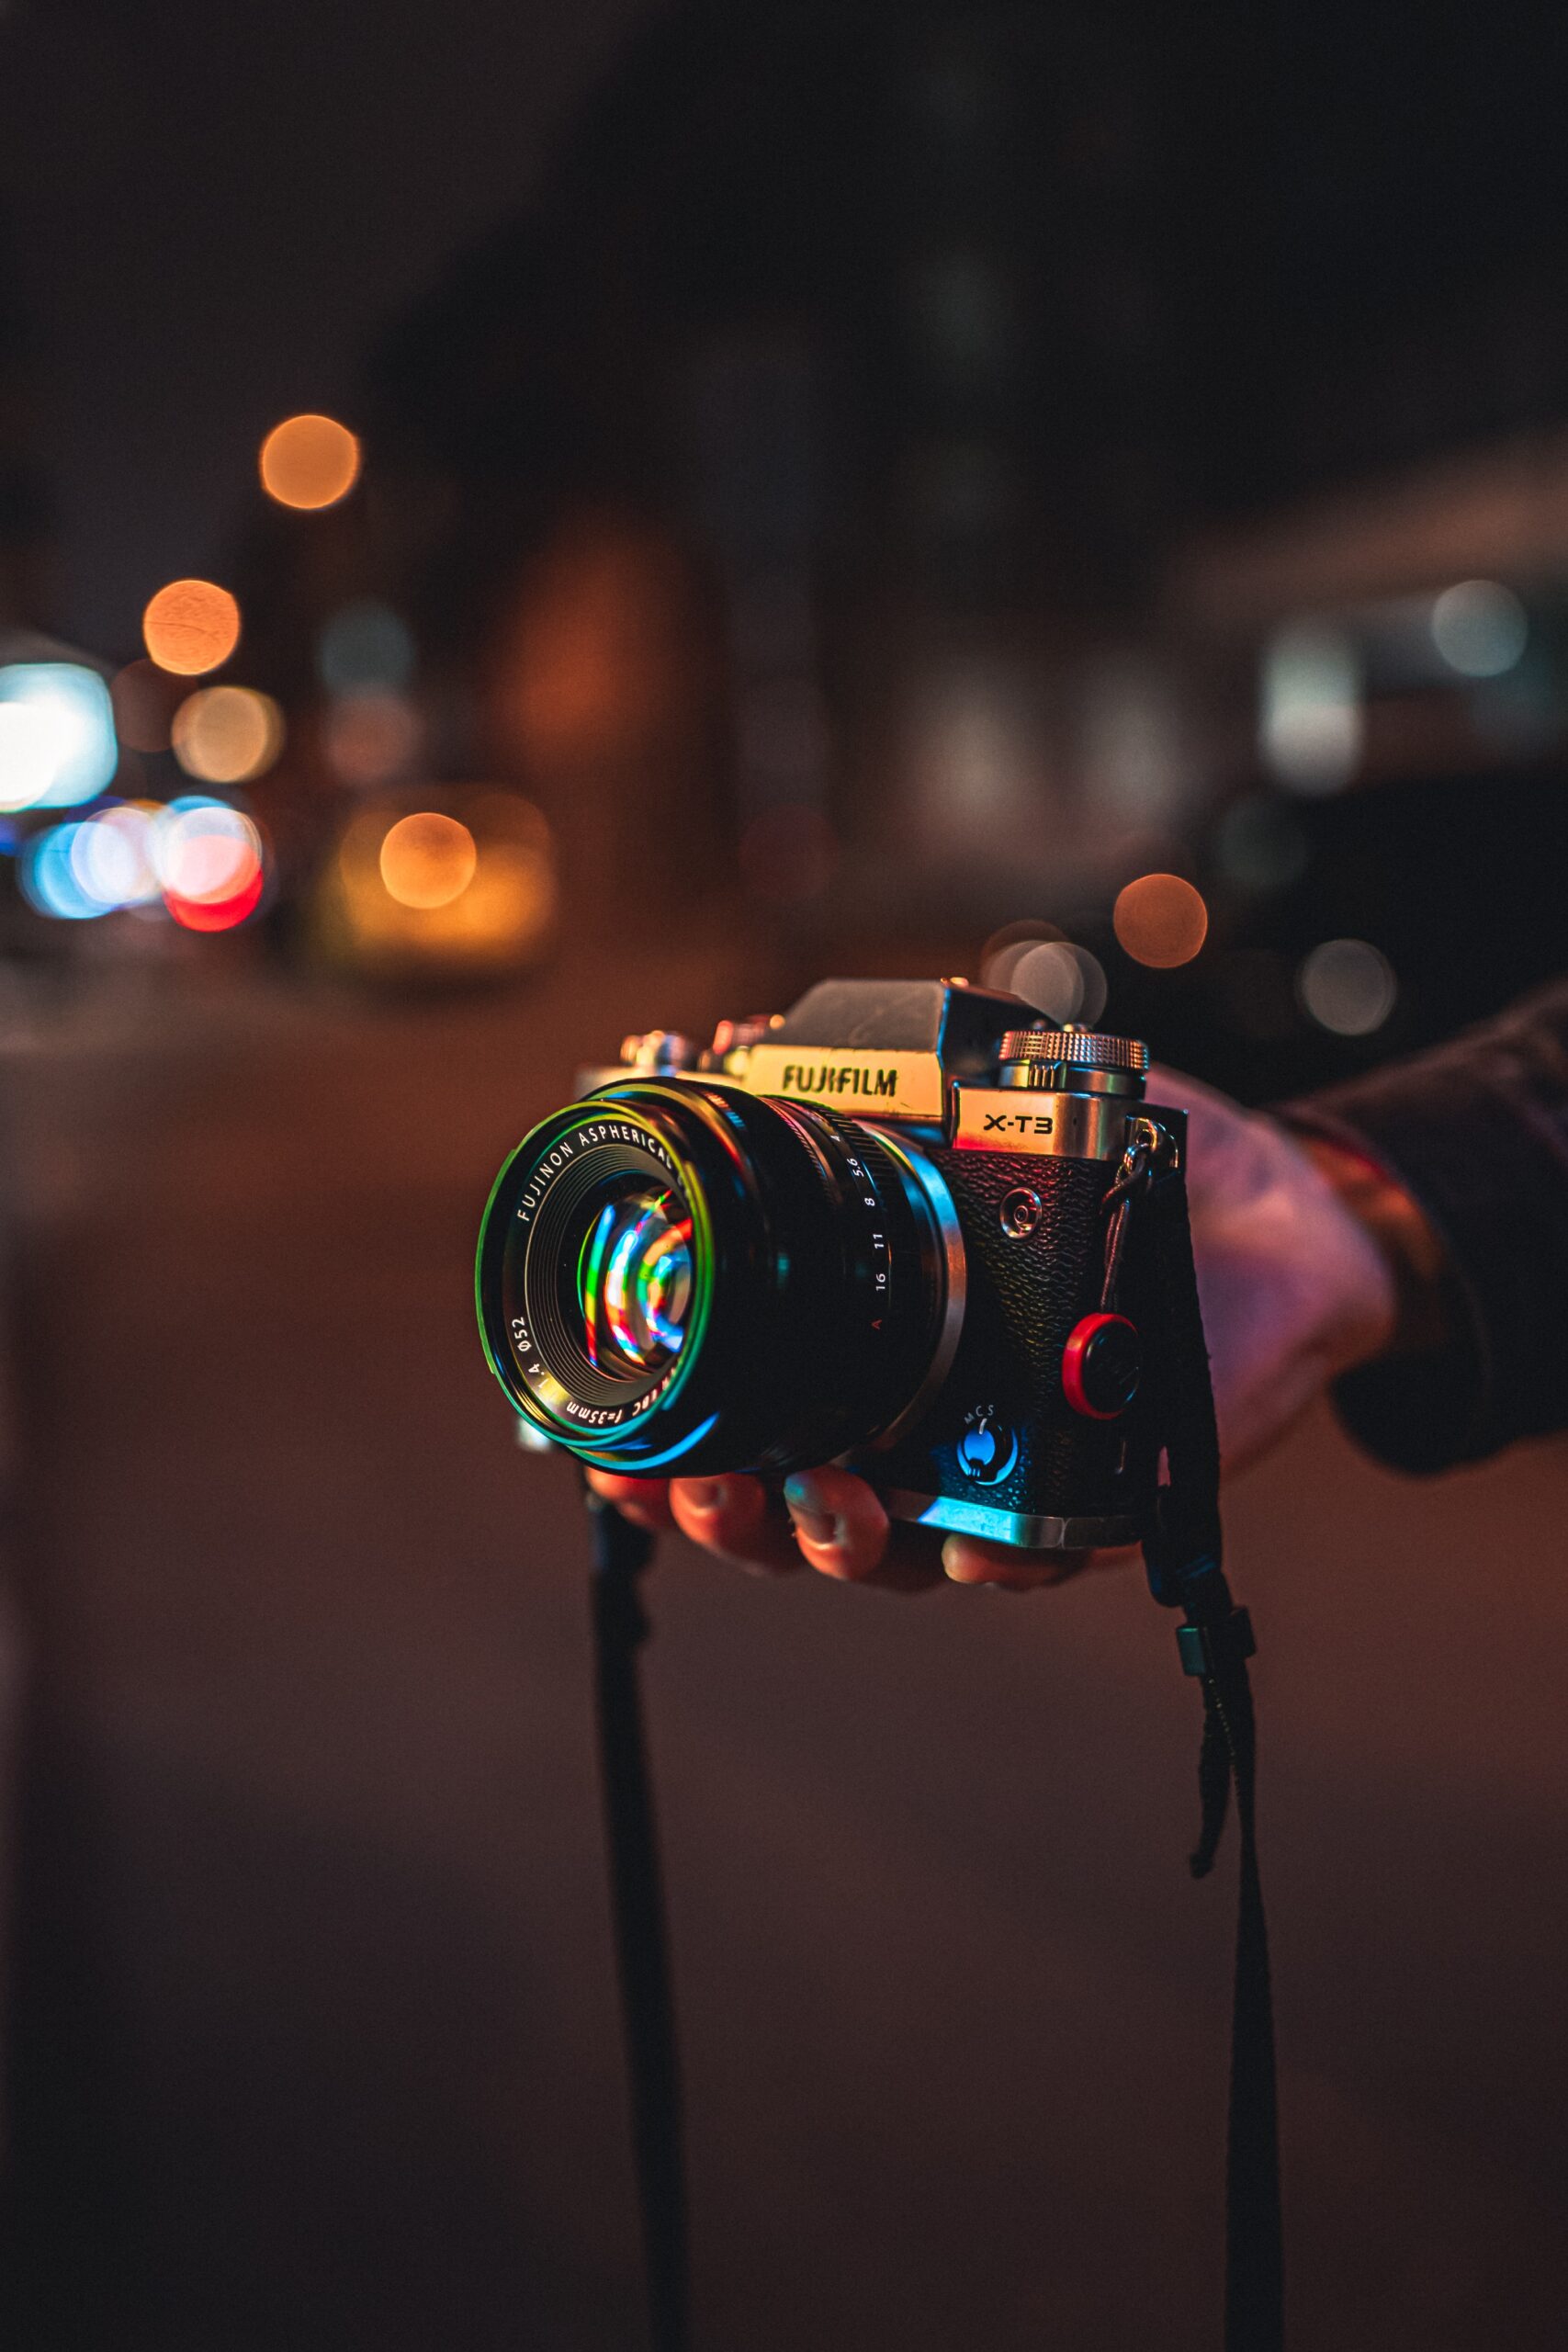 The camera contains visual aspects in its ability to take a photo and the colors reflecting off of it. Visual rhetoric includes methods to study images taken by the camera above.